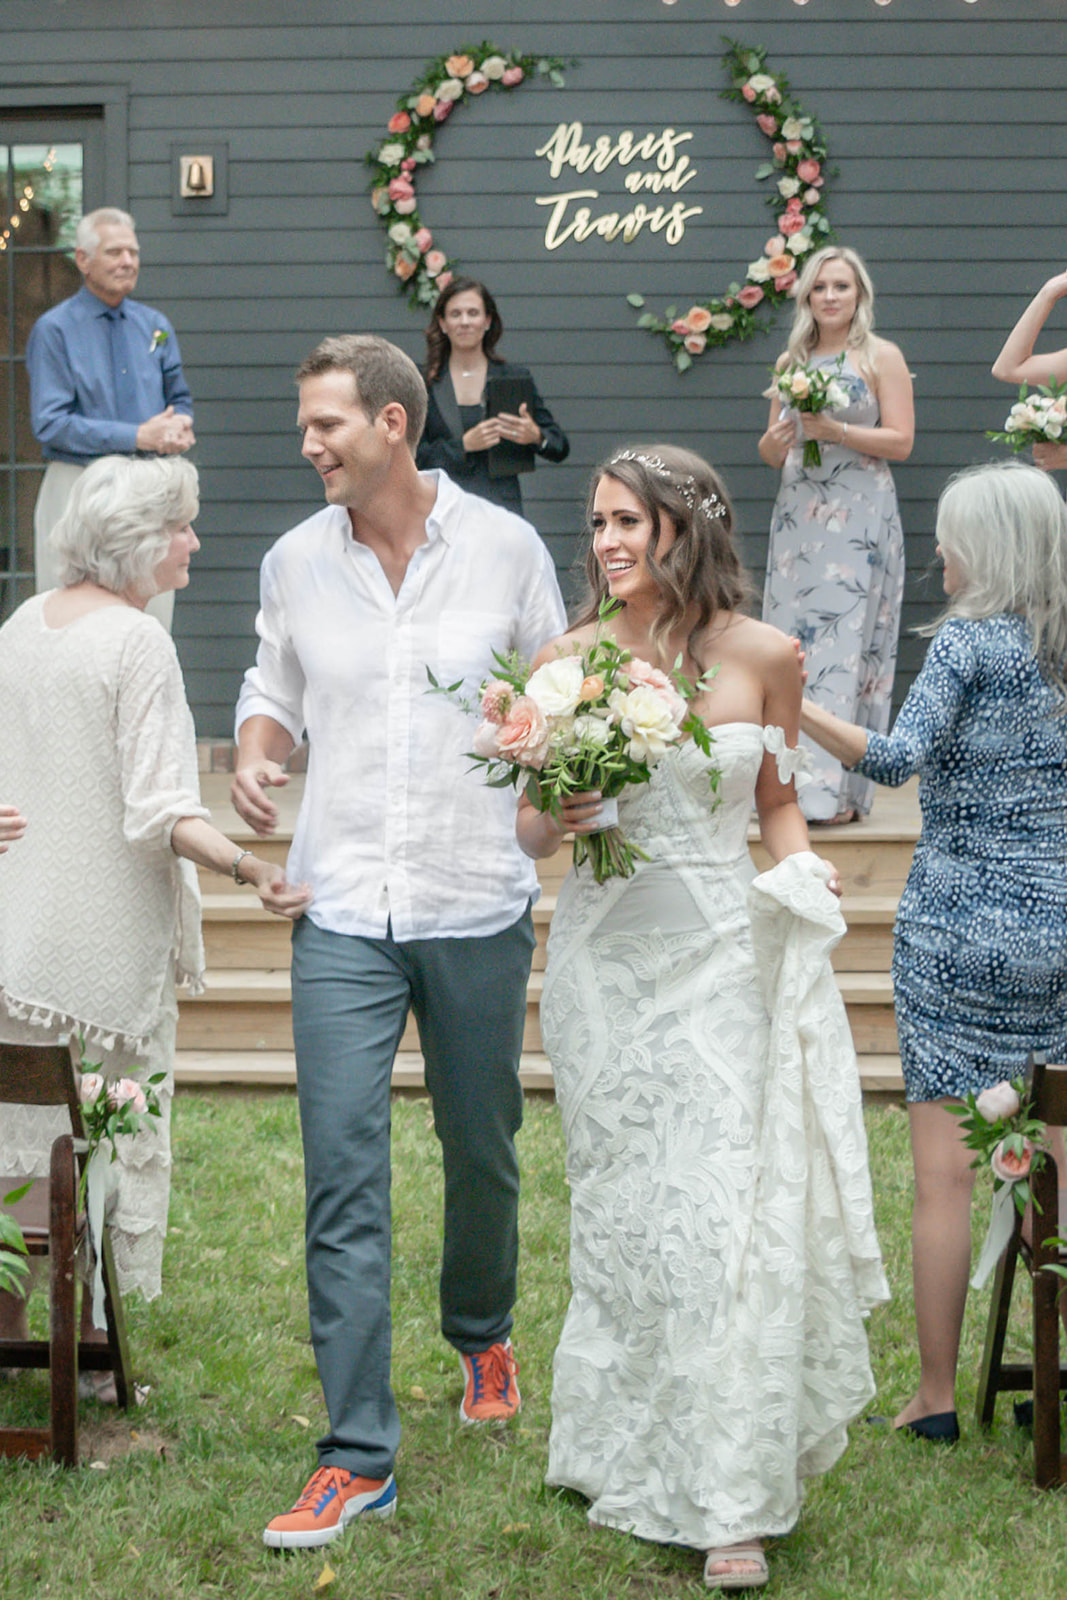 Intimate Boho Albaster Collective Wedding featured on Nashville Bride Guide